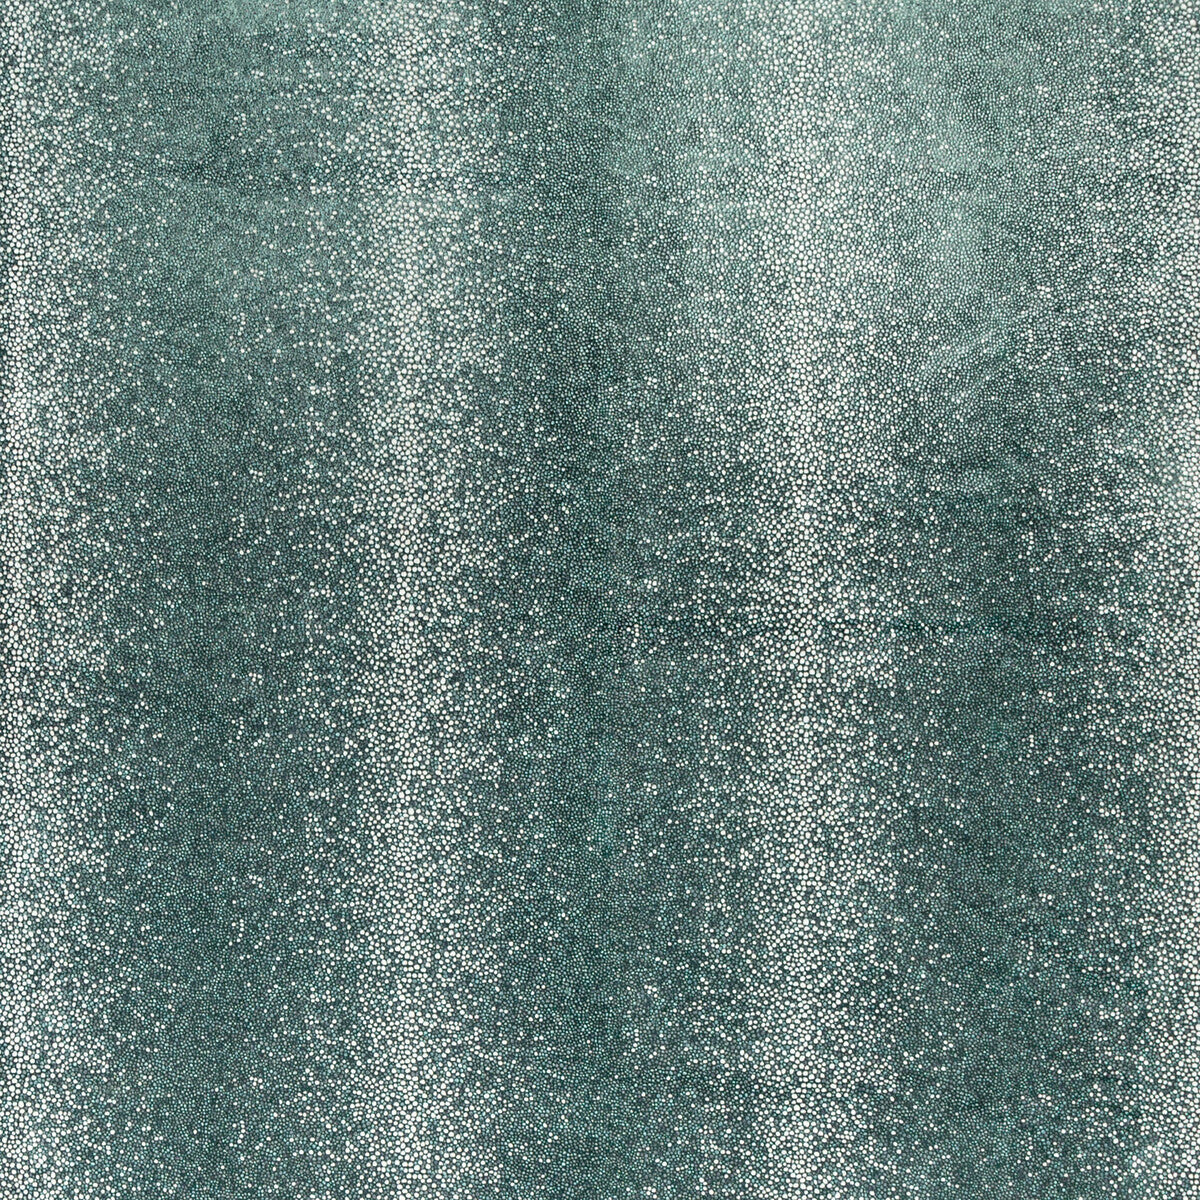 Kravet Couture fabric in 34031-35 color - pattern 34031.35.0 - by Kravet Couture